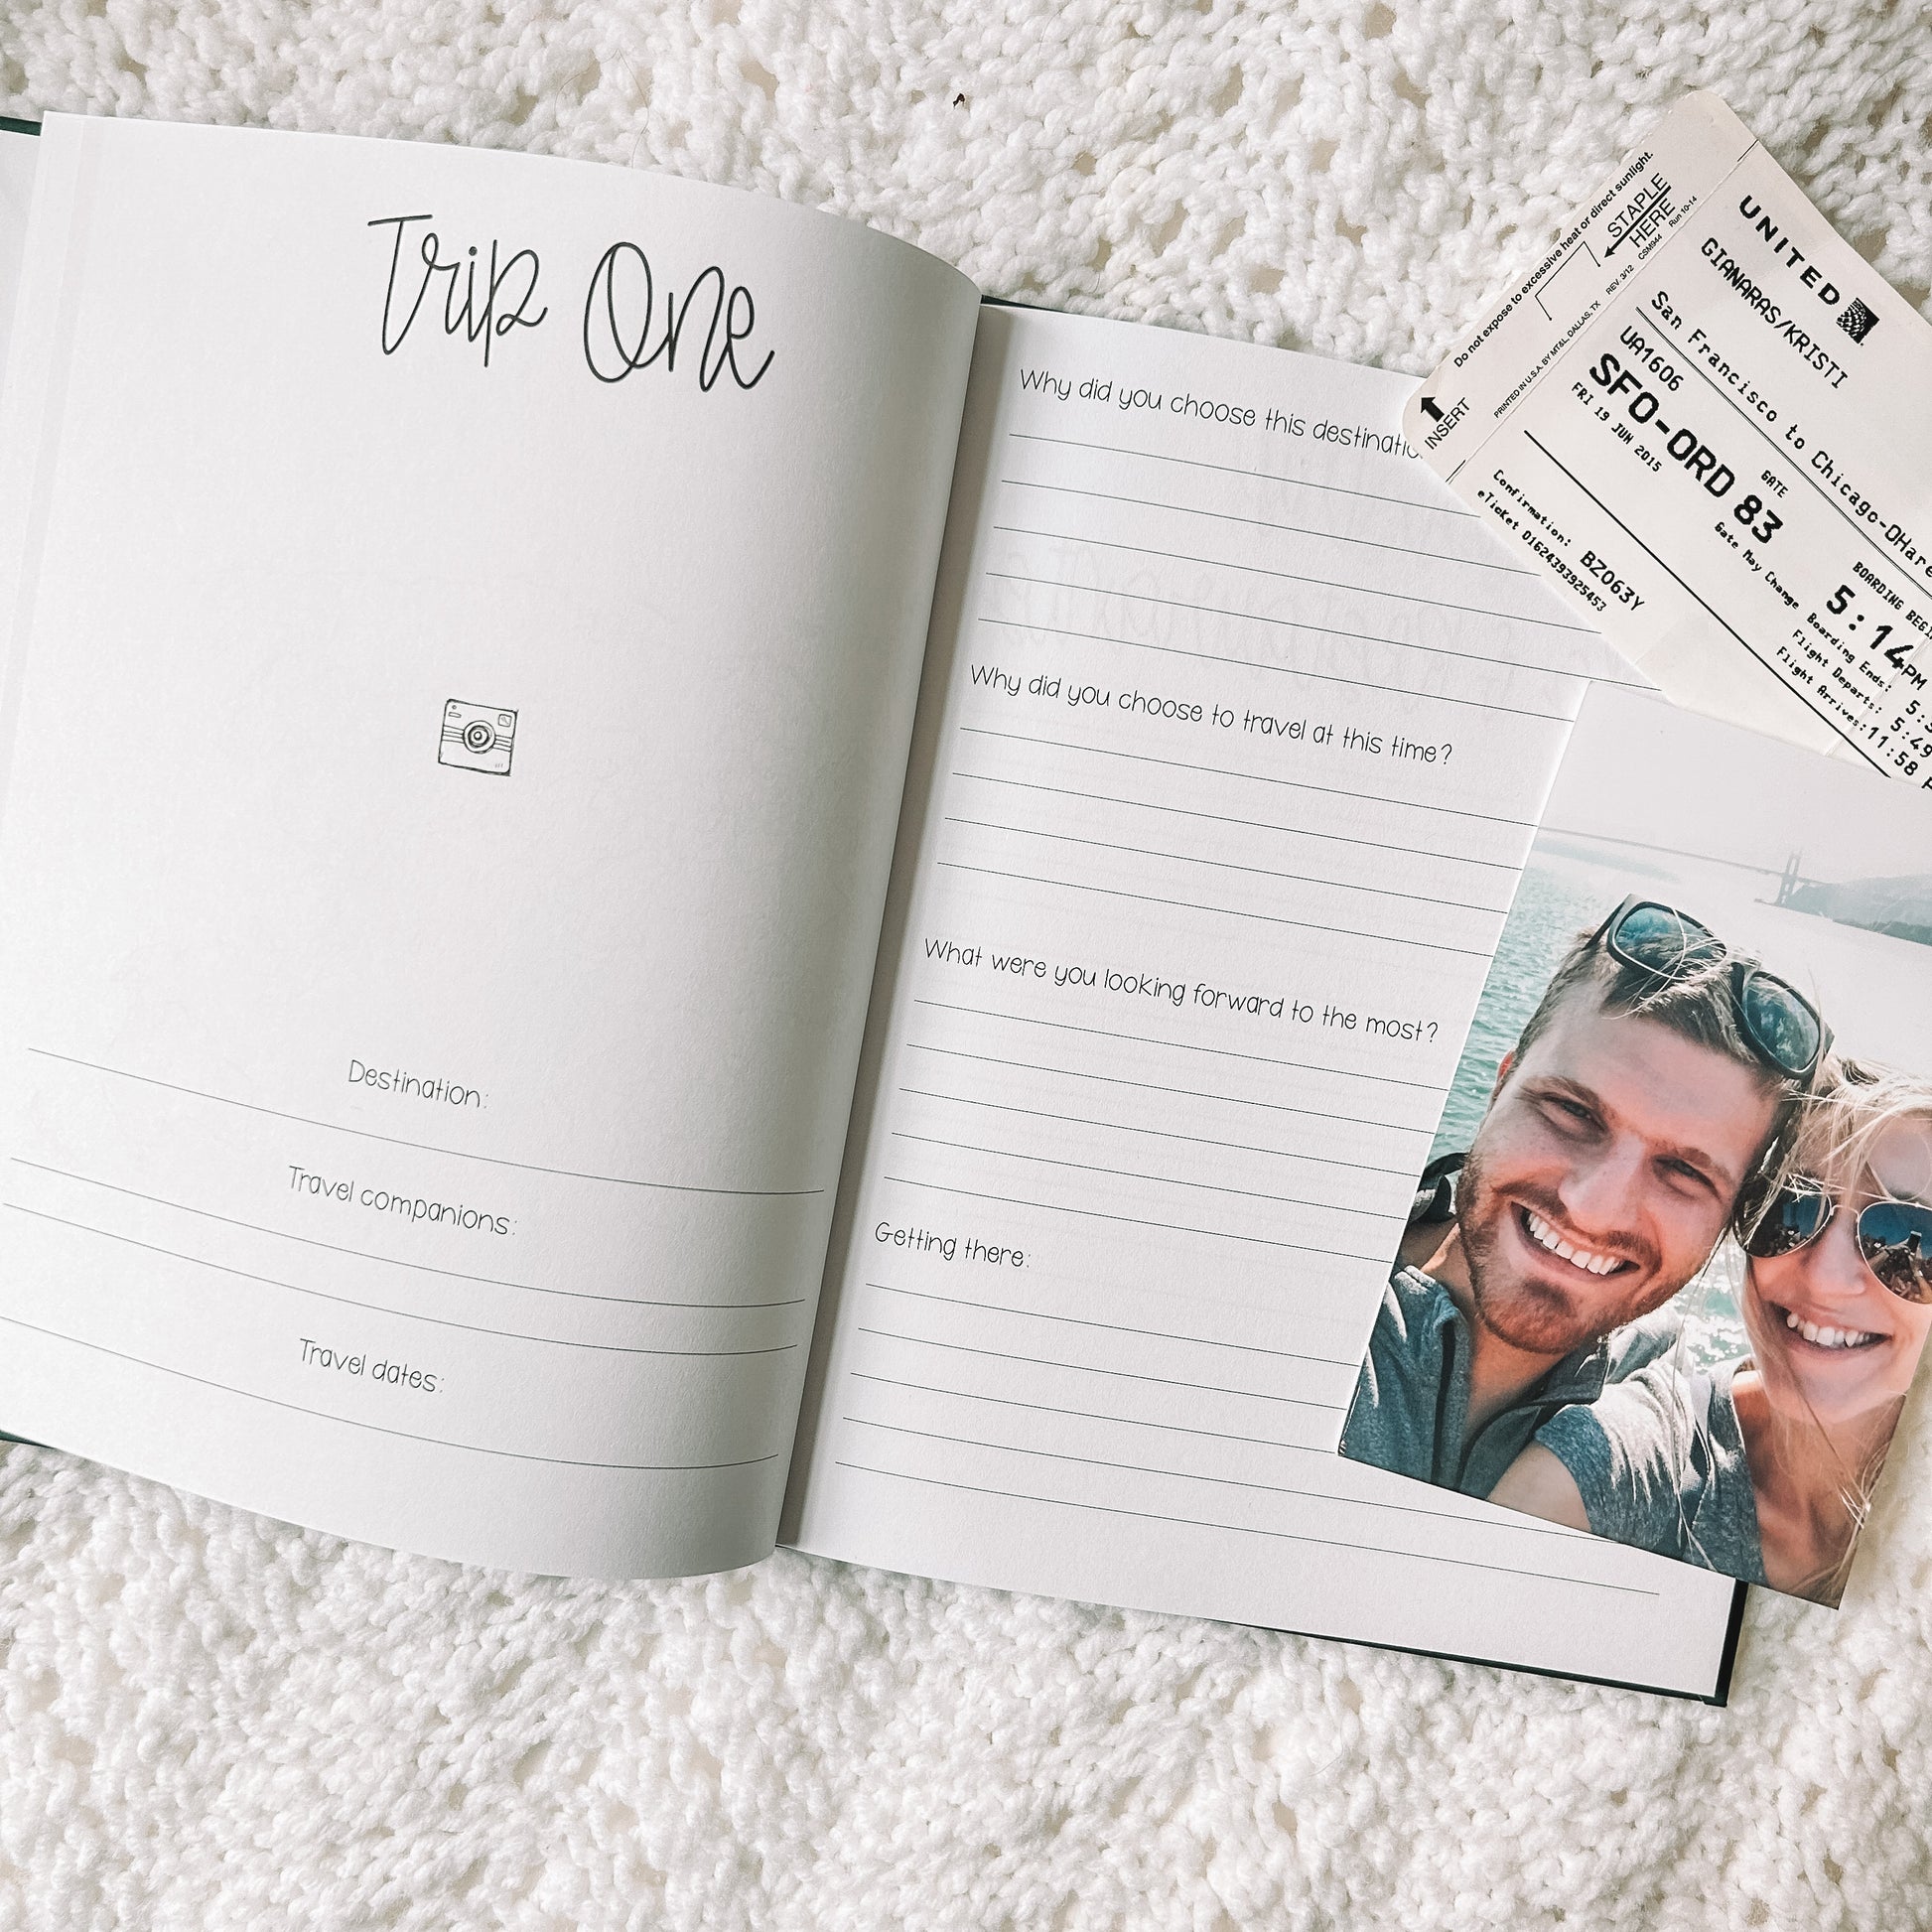 Three trips can be recorded. Each trip begins with a two page spread. Lefthand side has the trip number, space for a photo, and room to record the destination, travel companions, and travel dates. Righthand side has four prompts about the trip.